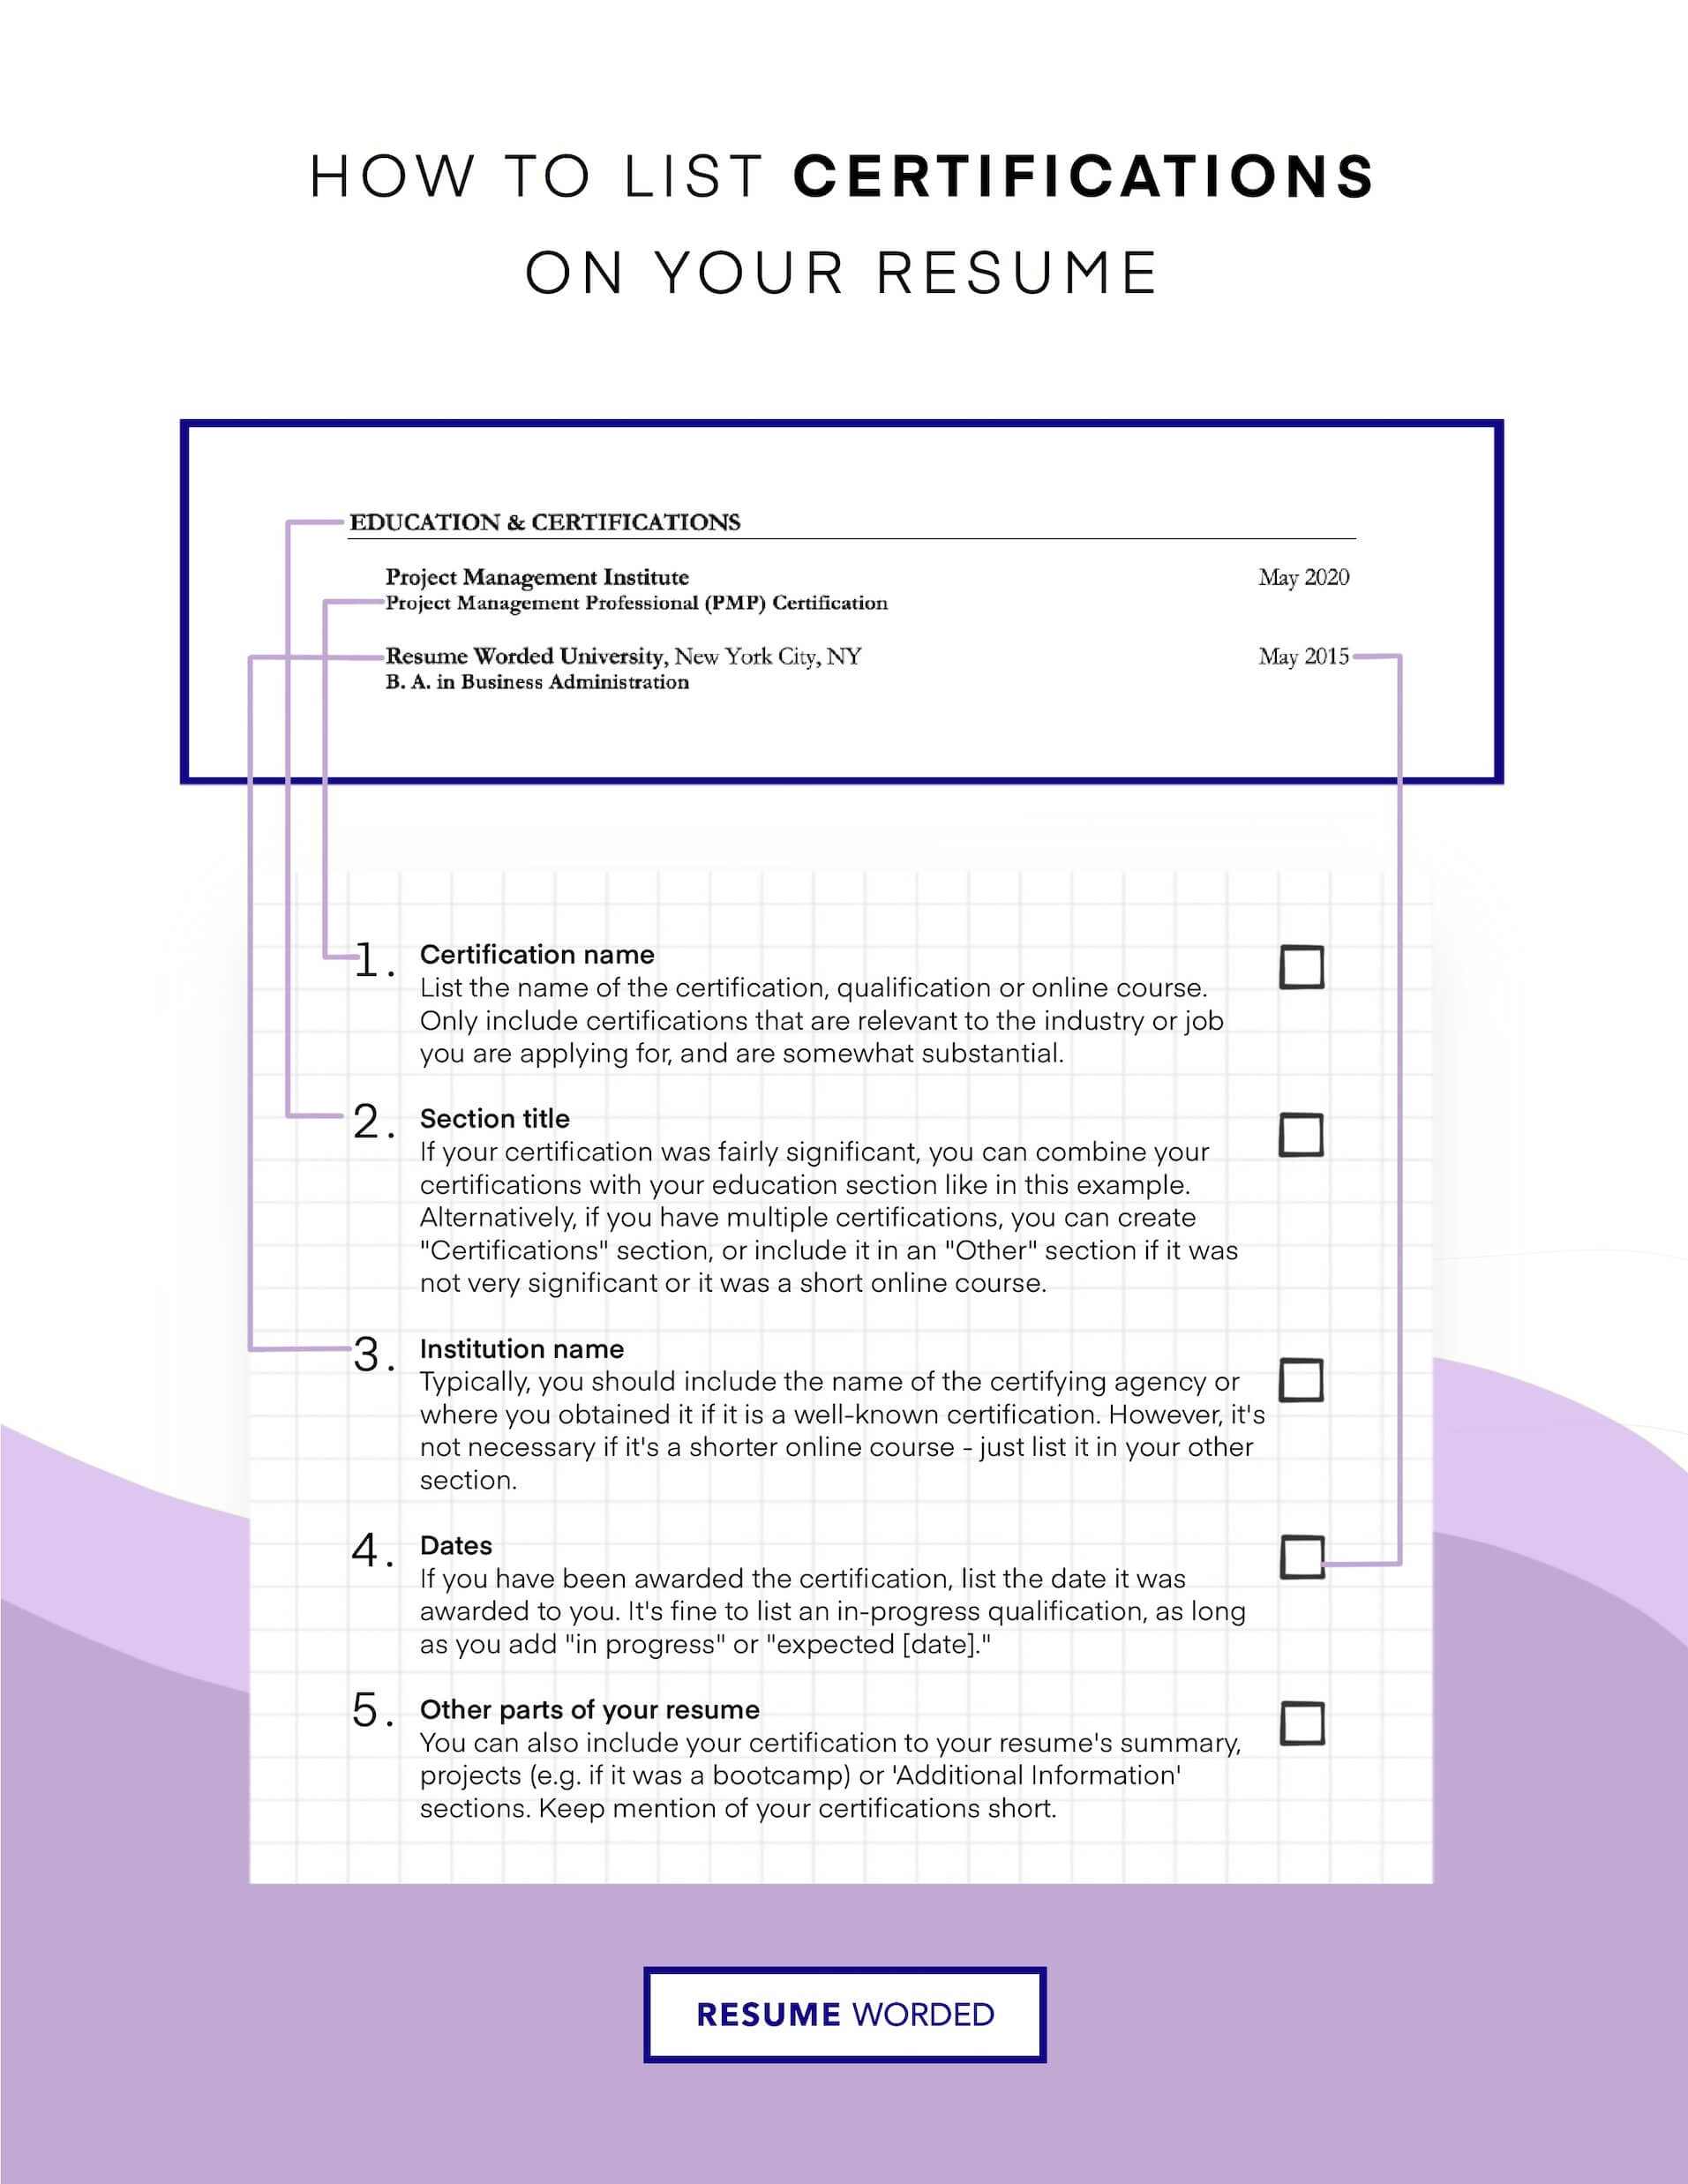 Highlights certificates that are relevant to an inside sales associate - Inside Sales Associate Resume